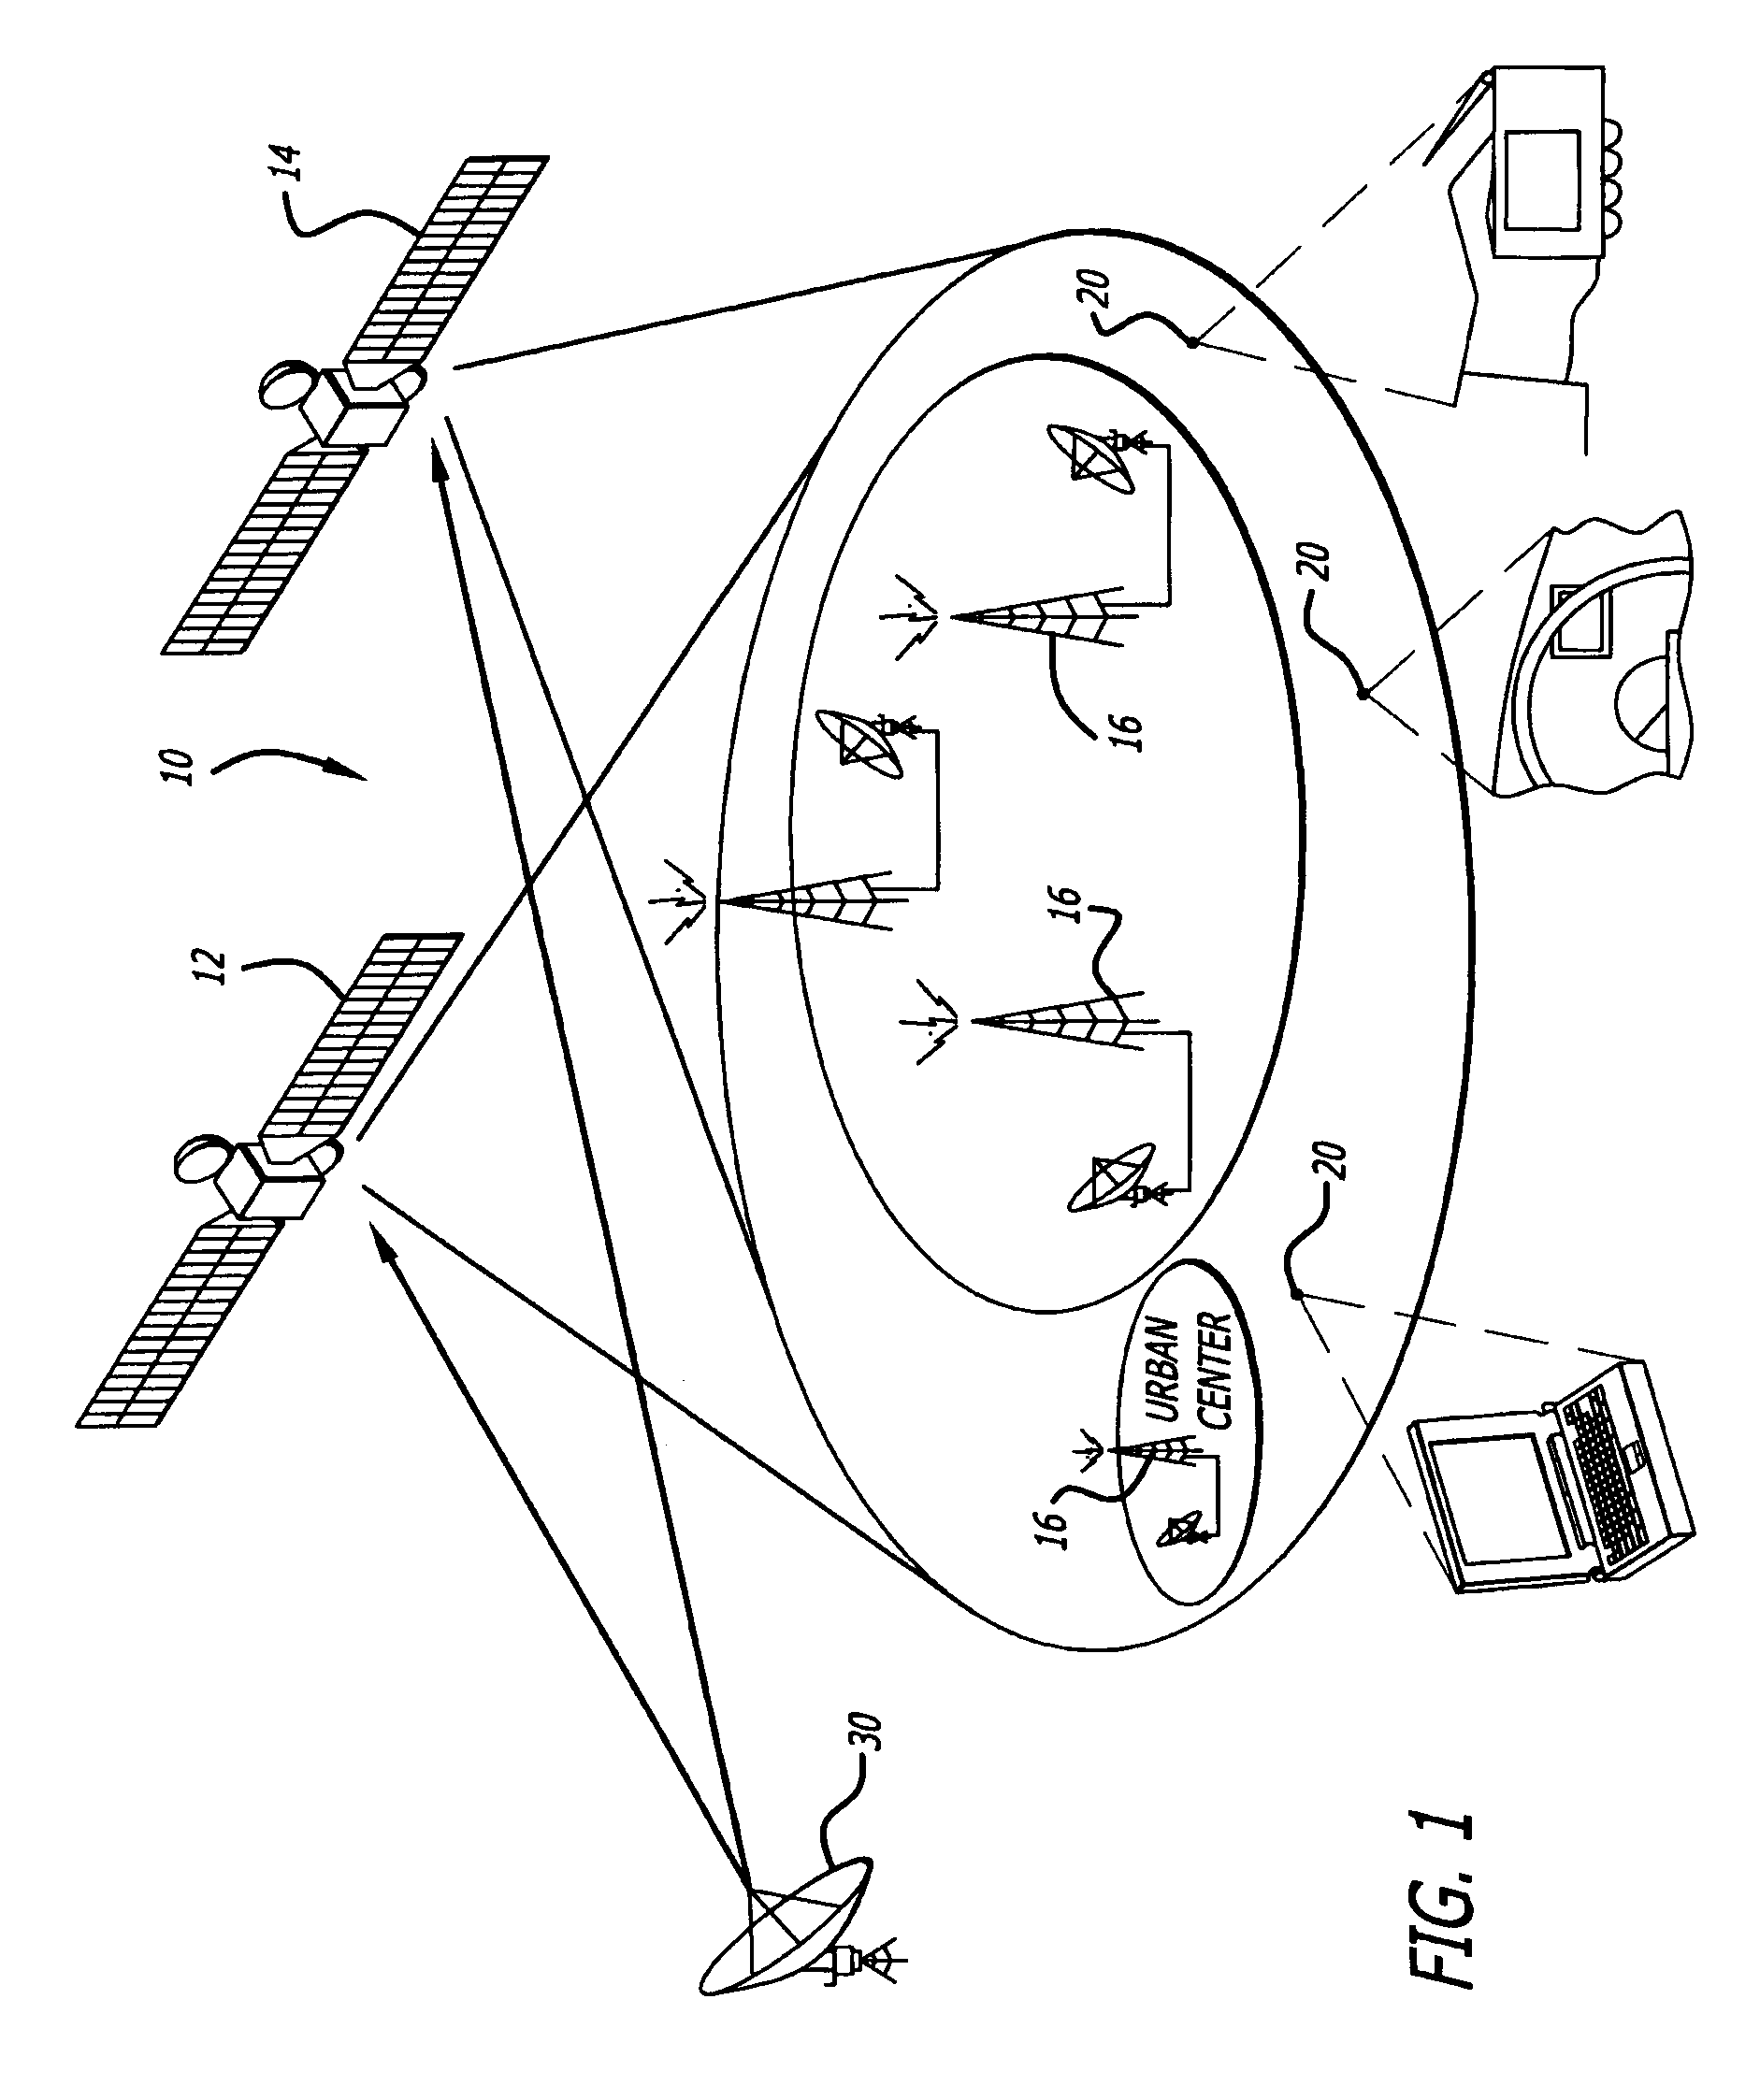 System and method for distributing music and data